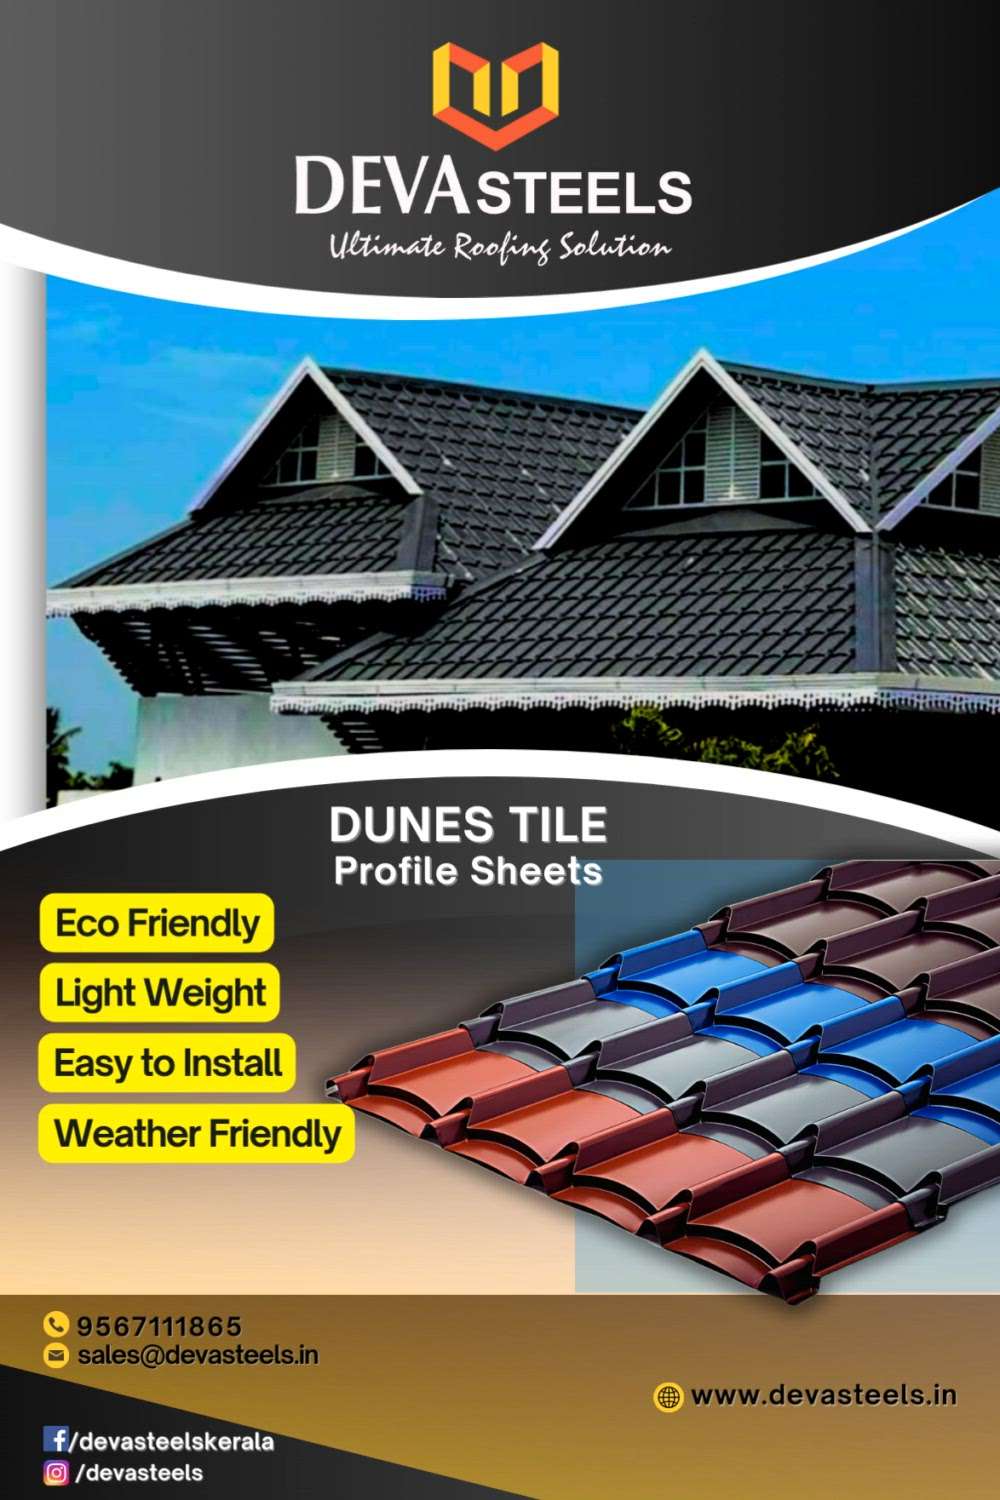 Bring ultimate beauty to your home by choosing 'DUNES' tile sheets..

✅ High quality
✅ Durability
✅ 100 + options
✅ Alu zinc & Aluminium
✅ Glossy & Mat finishes
✅ Clay / Shingle patterns
✅ Make : JSW & JINDAL

#MetalSheetRoofing #tileroof #tilesheet #aluminiumroofing #SteelRoofing #jswroofingsheets #jindalroofingsheets
#RoofingIdeas #RoofingDesigns #roofingexpert #RoofingDesigns